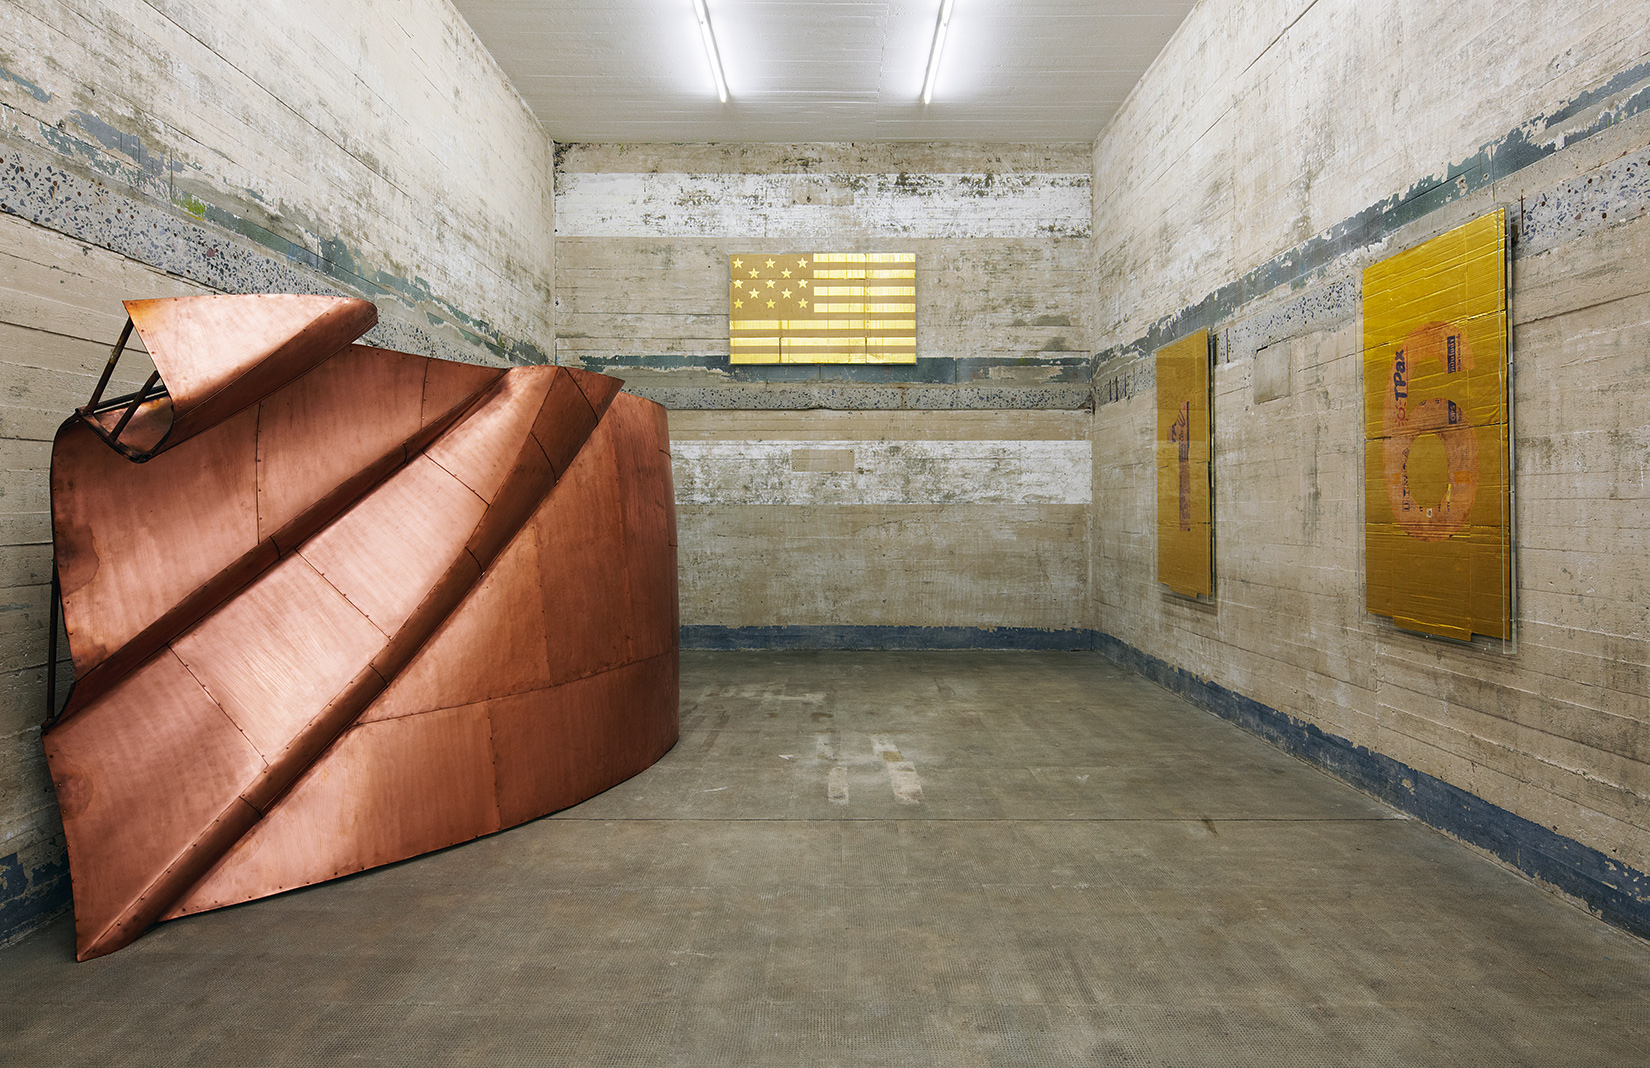 Danh Vo, ‘Numbers 6’, 2011; ‘Trio’, 2010; ‘We the people’ (detail), 2011. Courtesy of Sammlung Boros. Photography: Noshe